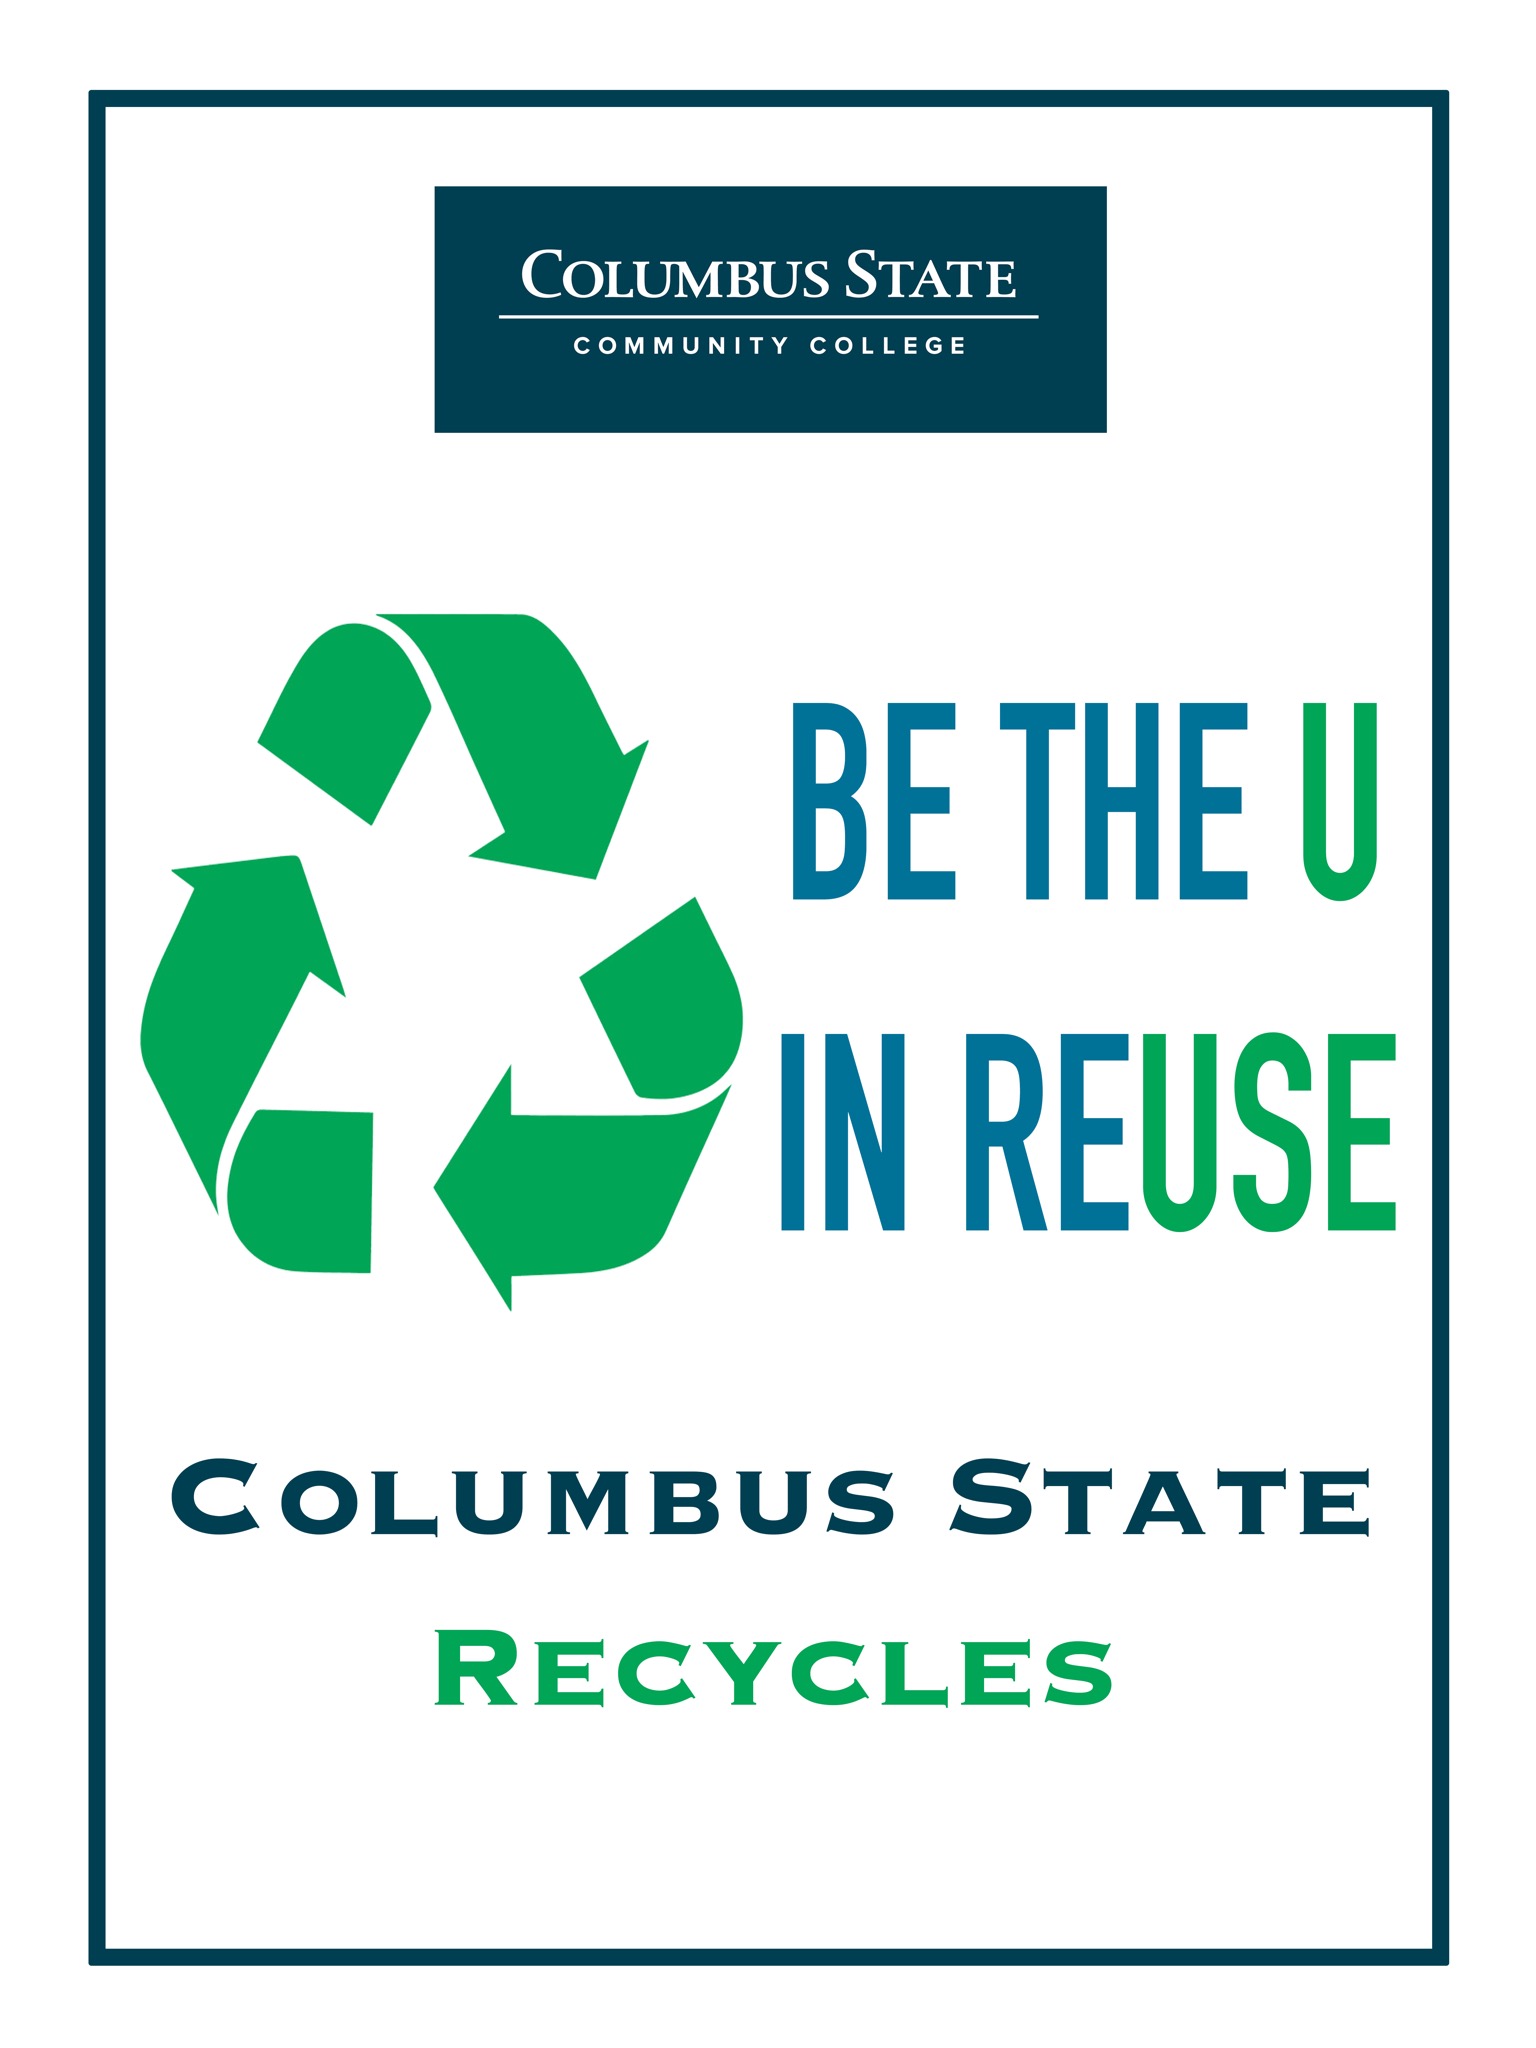 The "Be the U in reUse" poster.